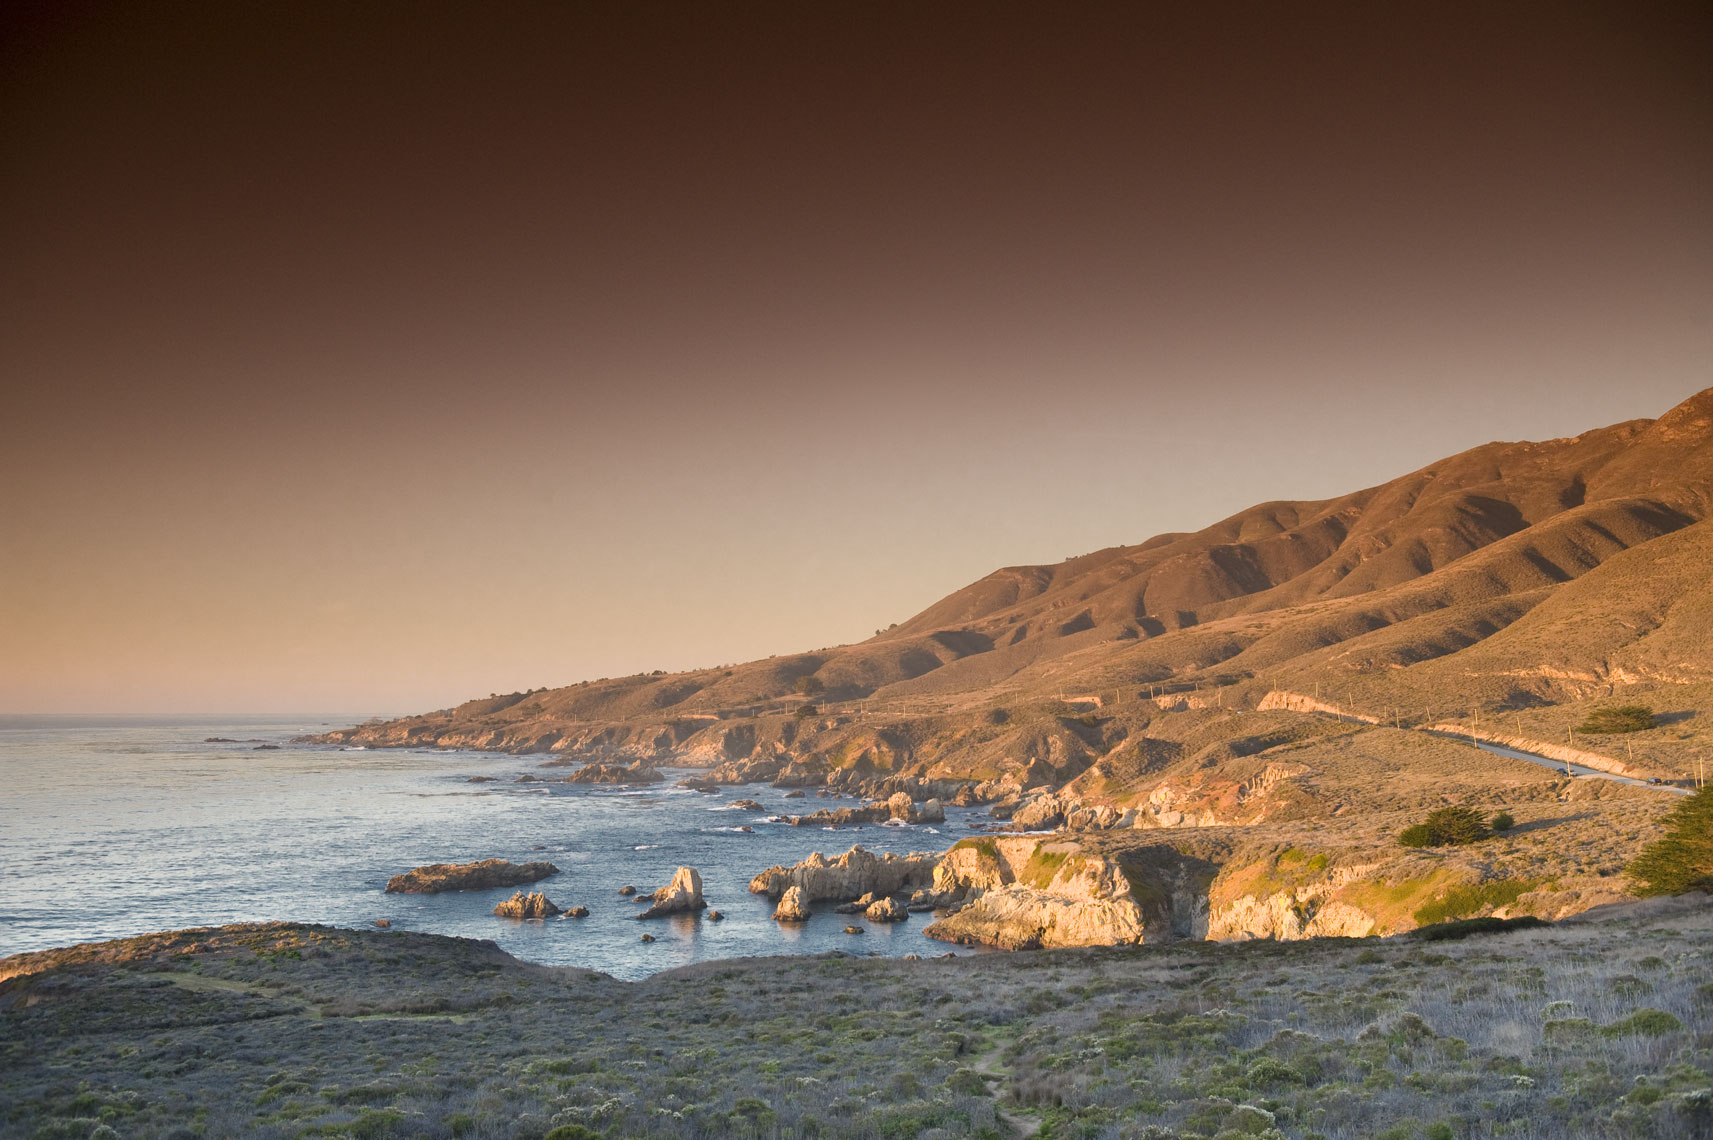 The rugged coastline and chaparral along Big Sur, California